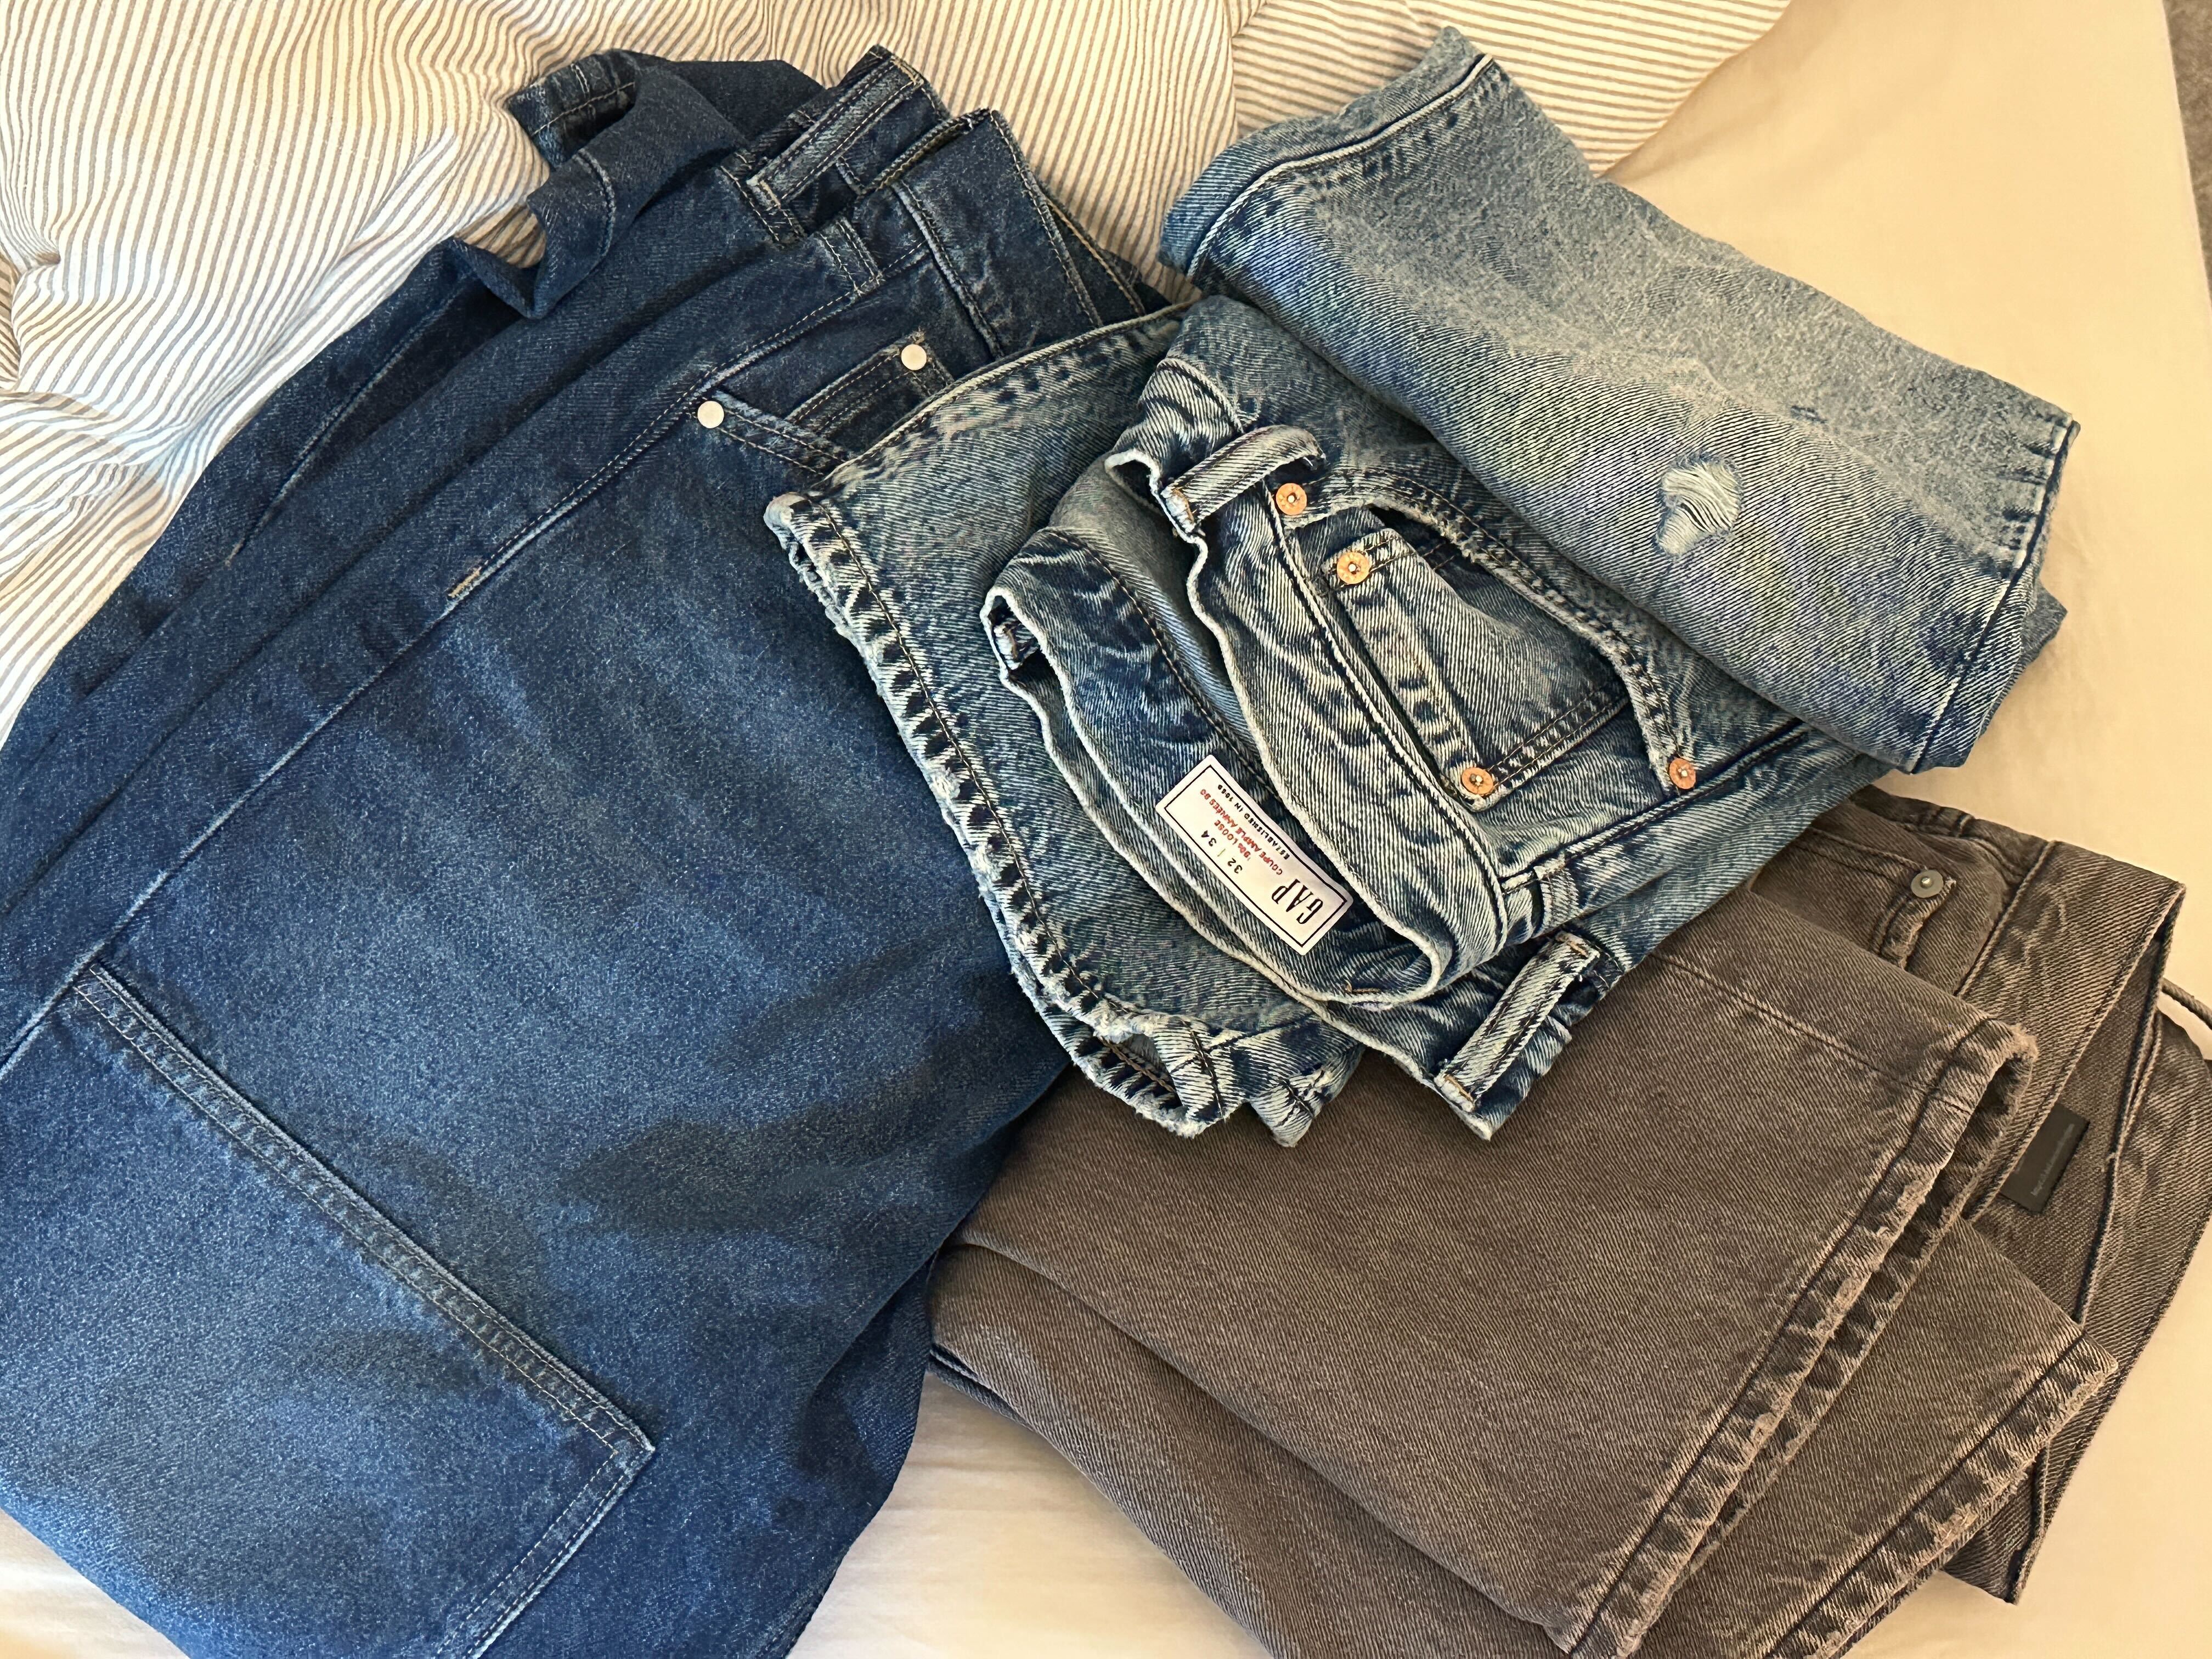 A selection of the jeans we tested